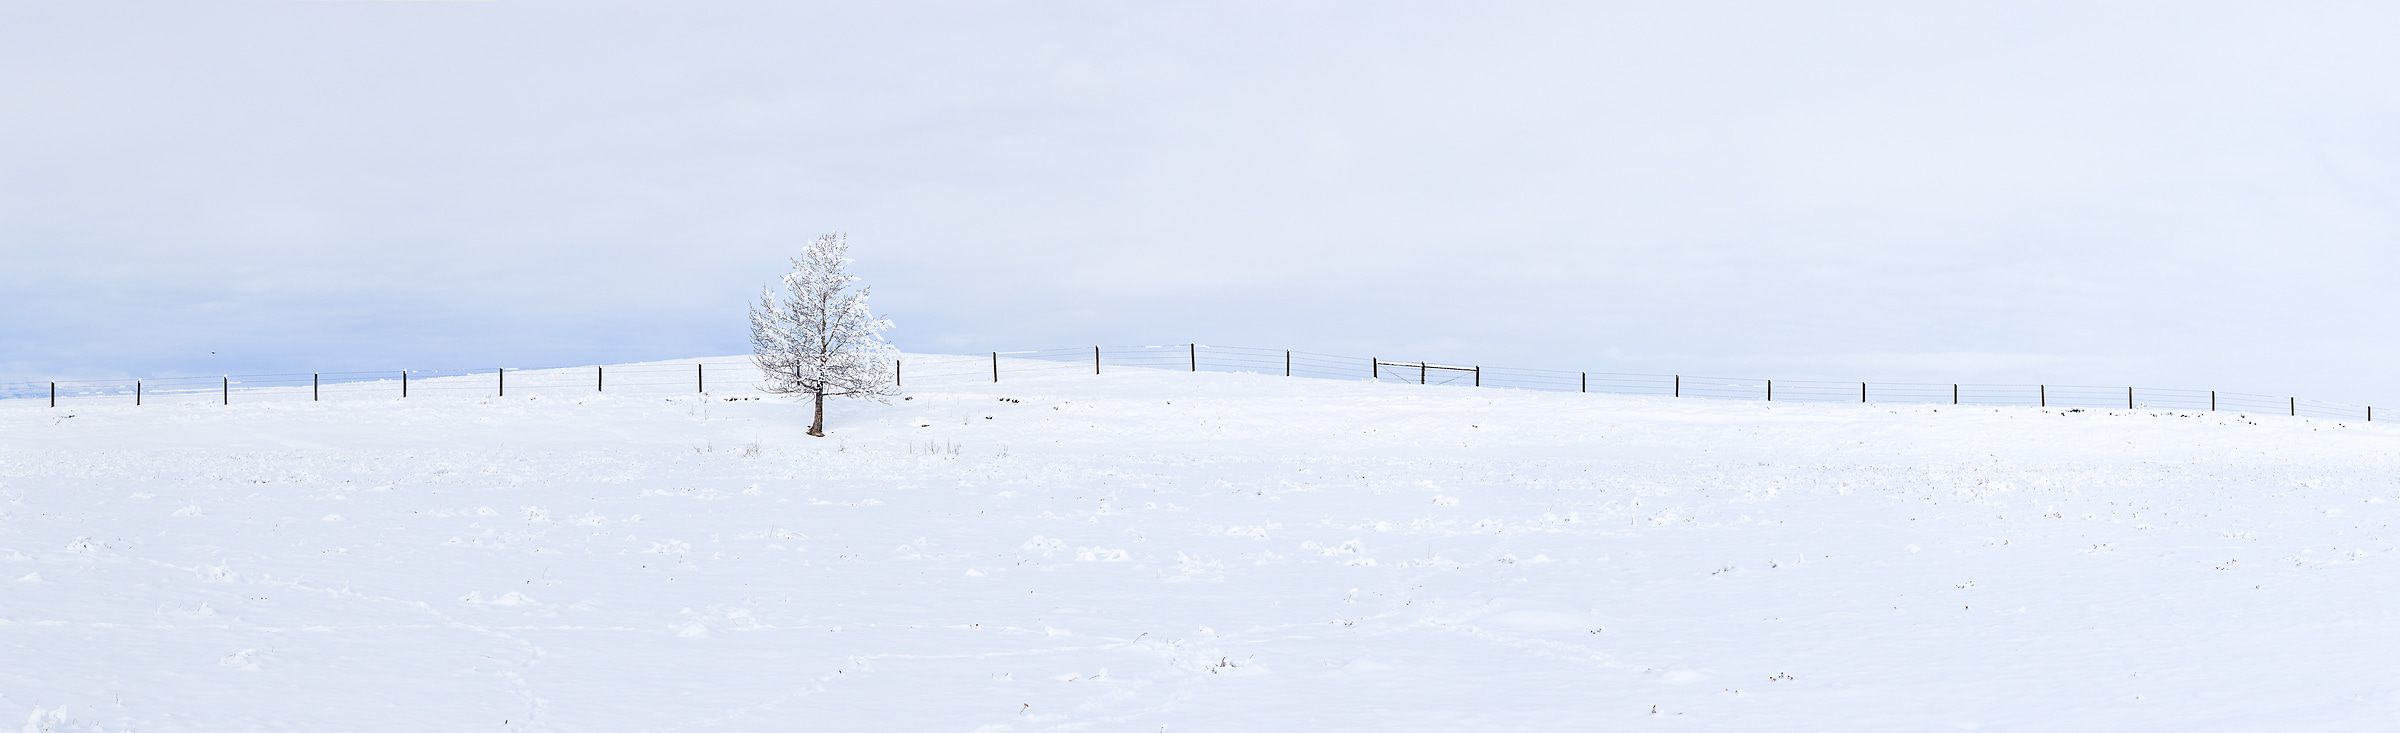 564 megapixels! A very high resolution, large-format VAST photo print of a snowy field with a tree; landscape photograph created by Scott Dimond in Cayley, Alberta, Canada.